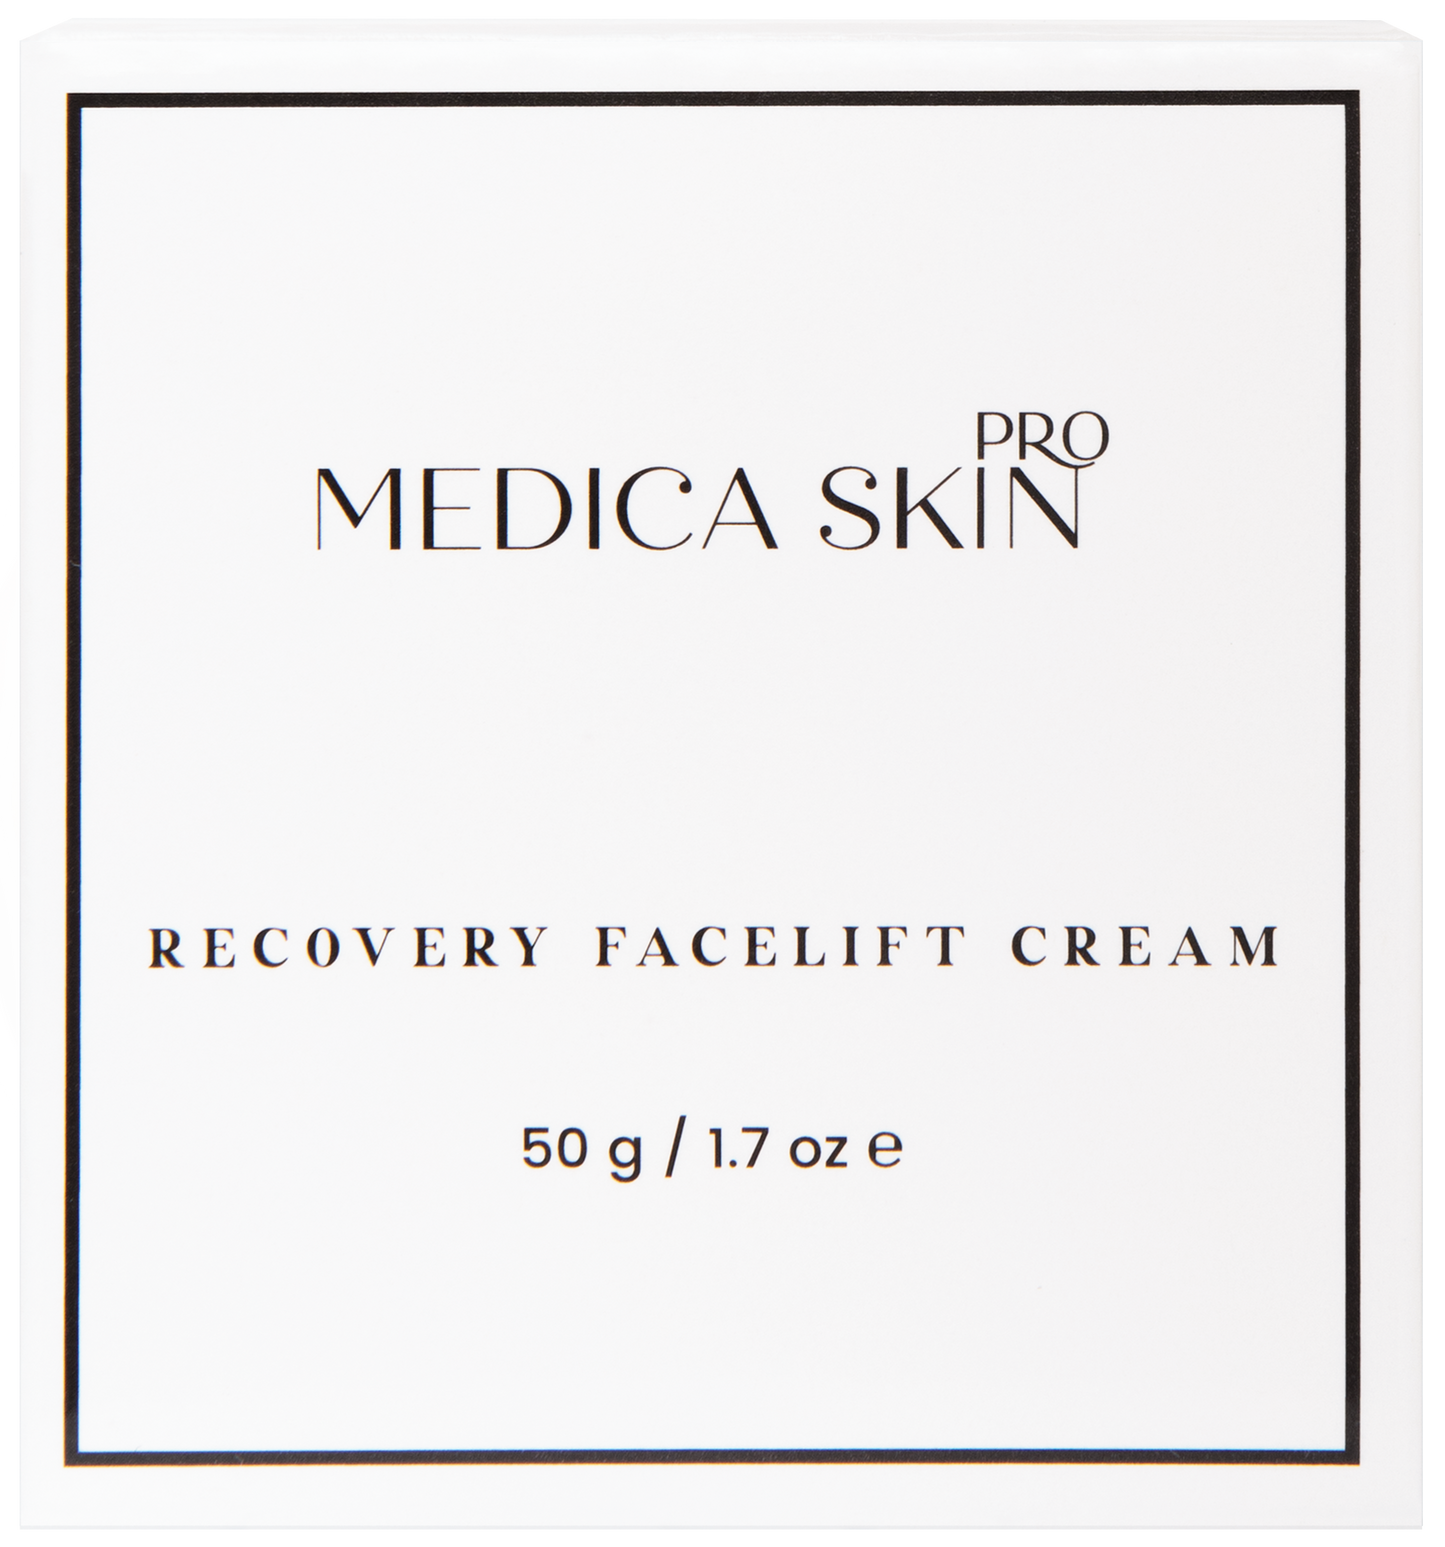 Recovery Facelift Cream